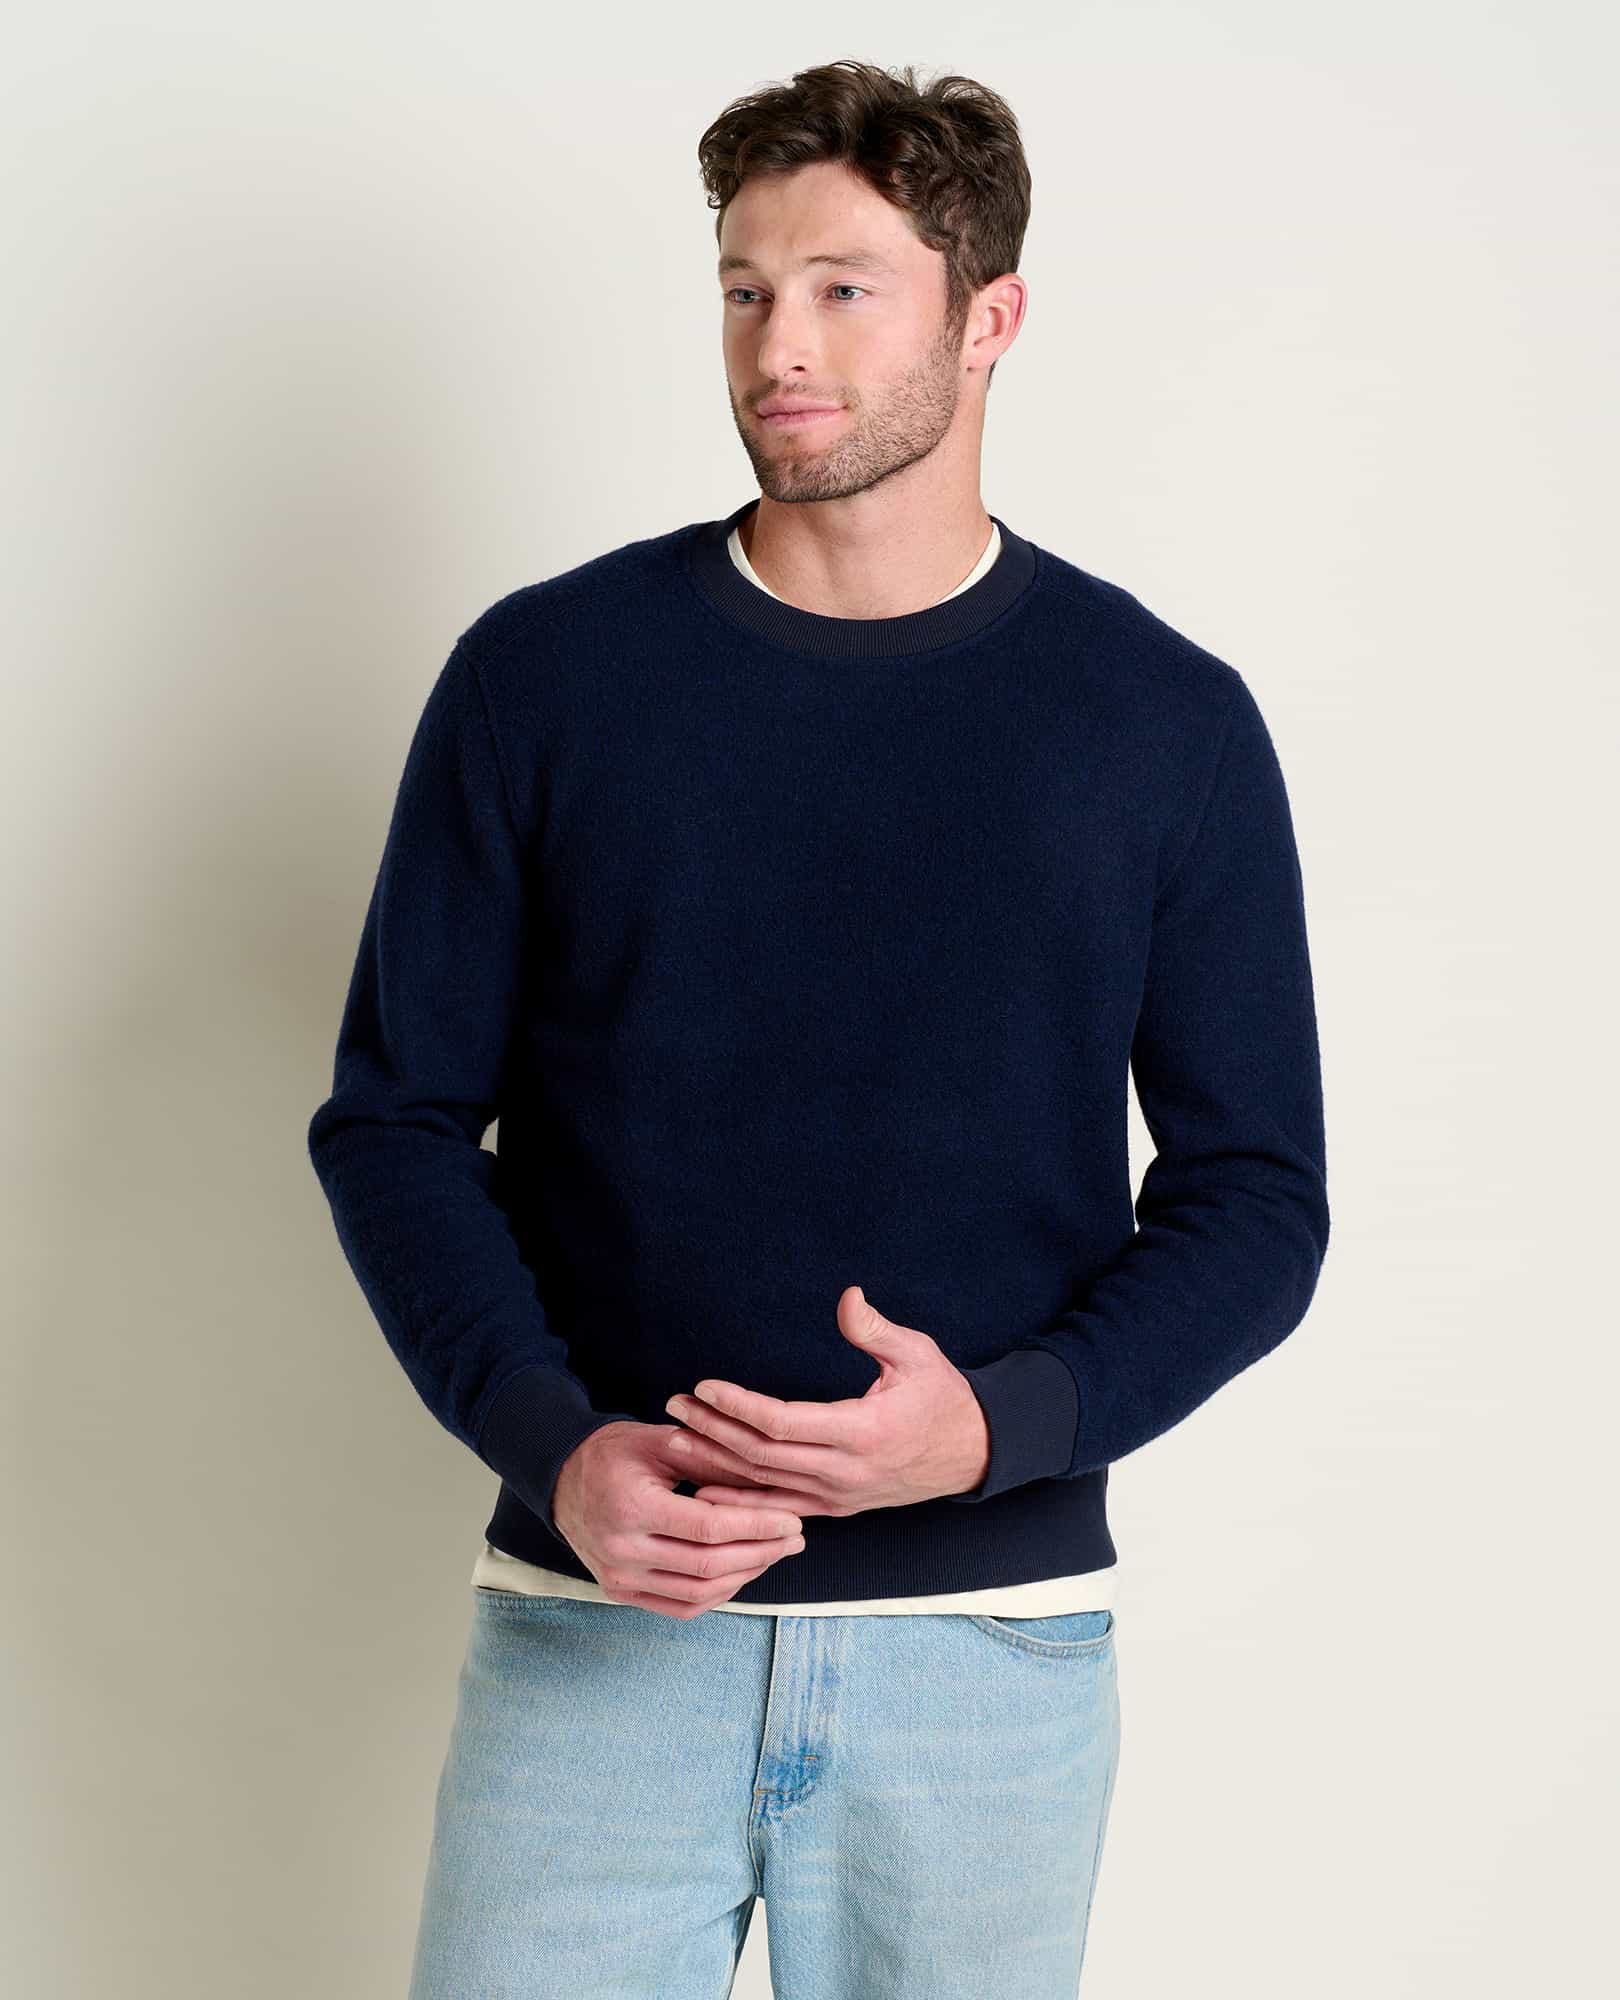 Kennicott Crew | Recycled Wool Blend Sweater by Toad&Co